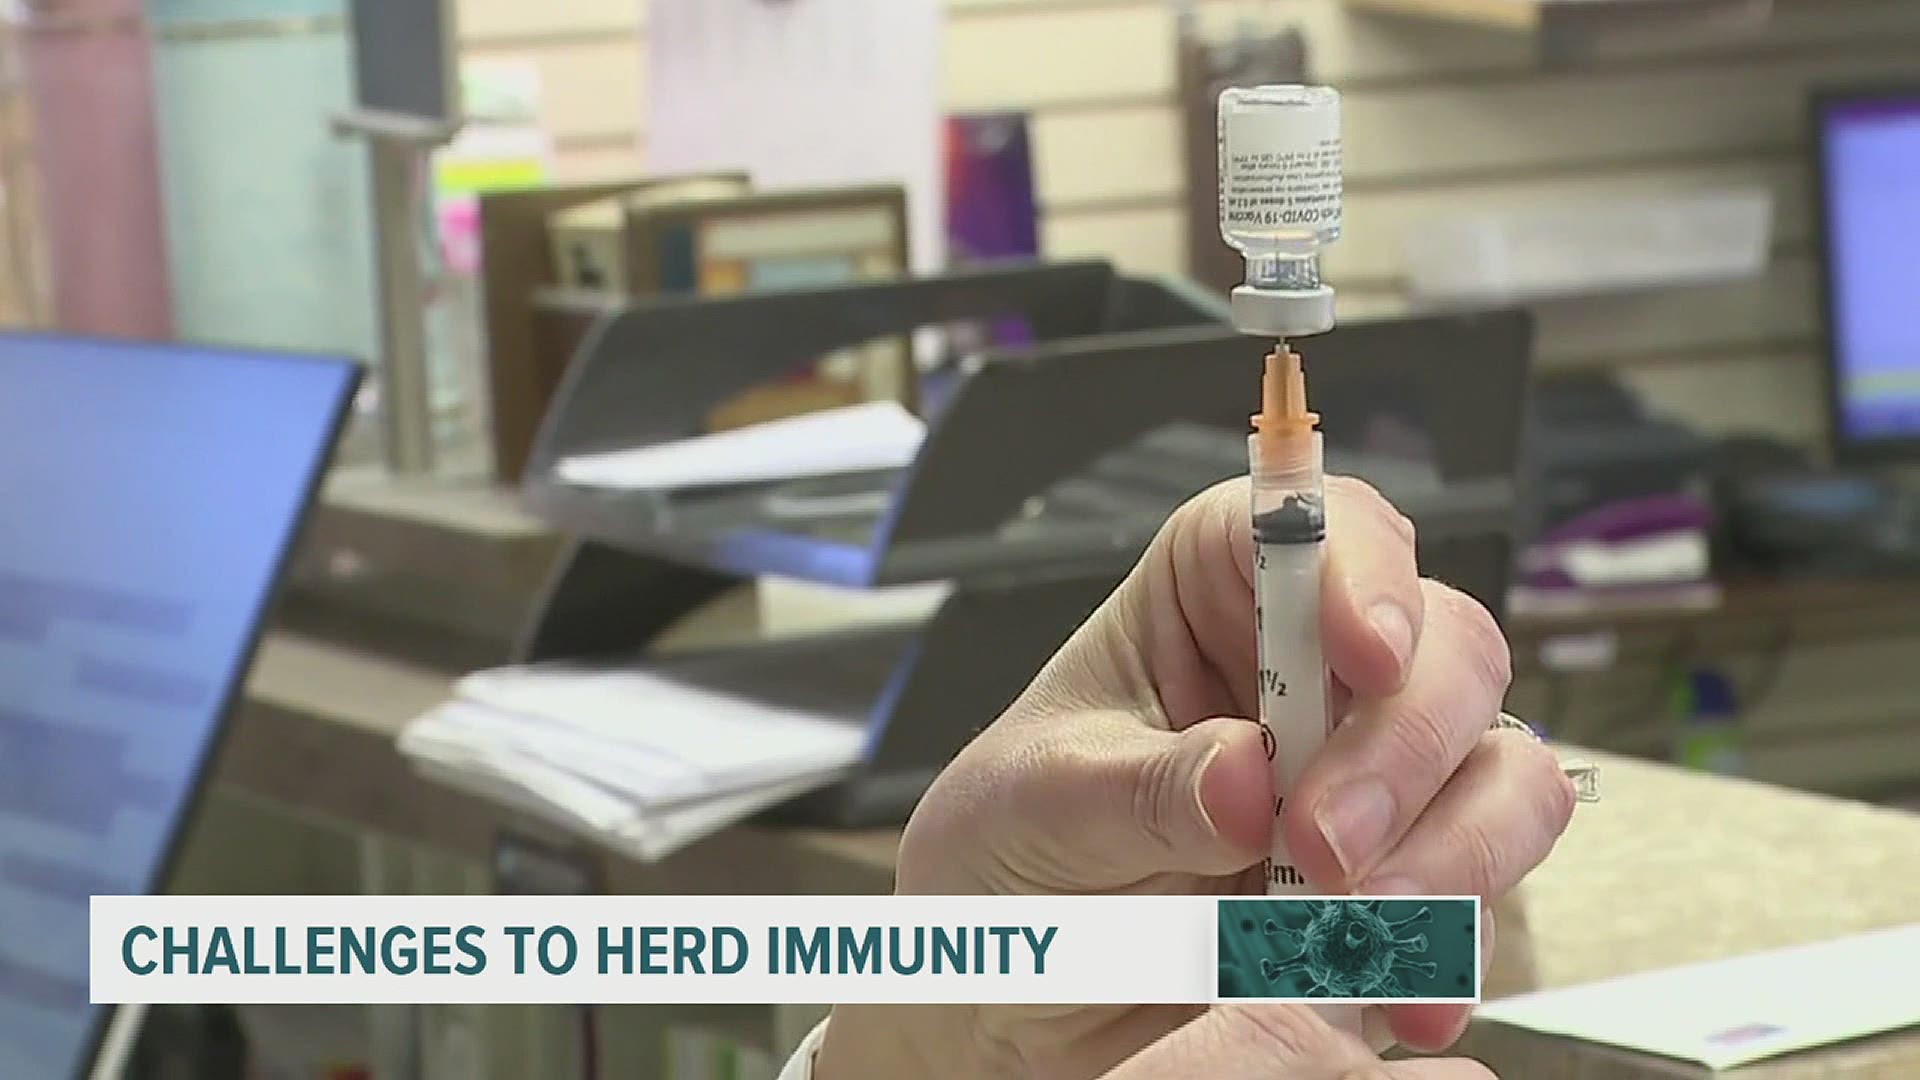 Right now, experts are debating if and when the U.S. will reach herd immunity. Some don't think it can be achieved.